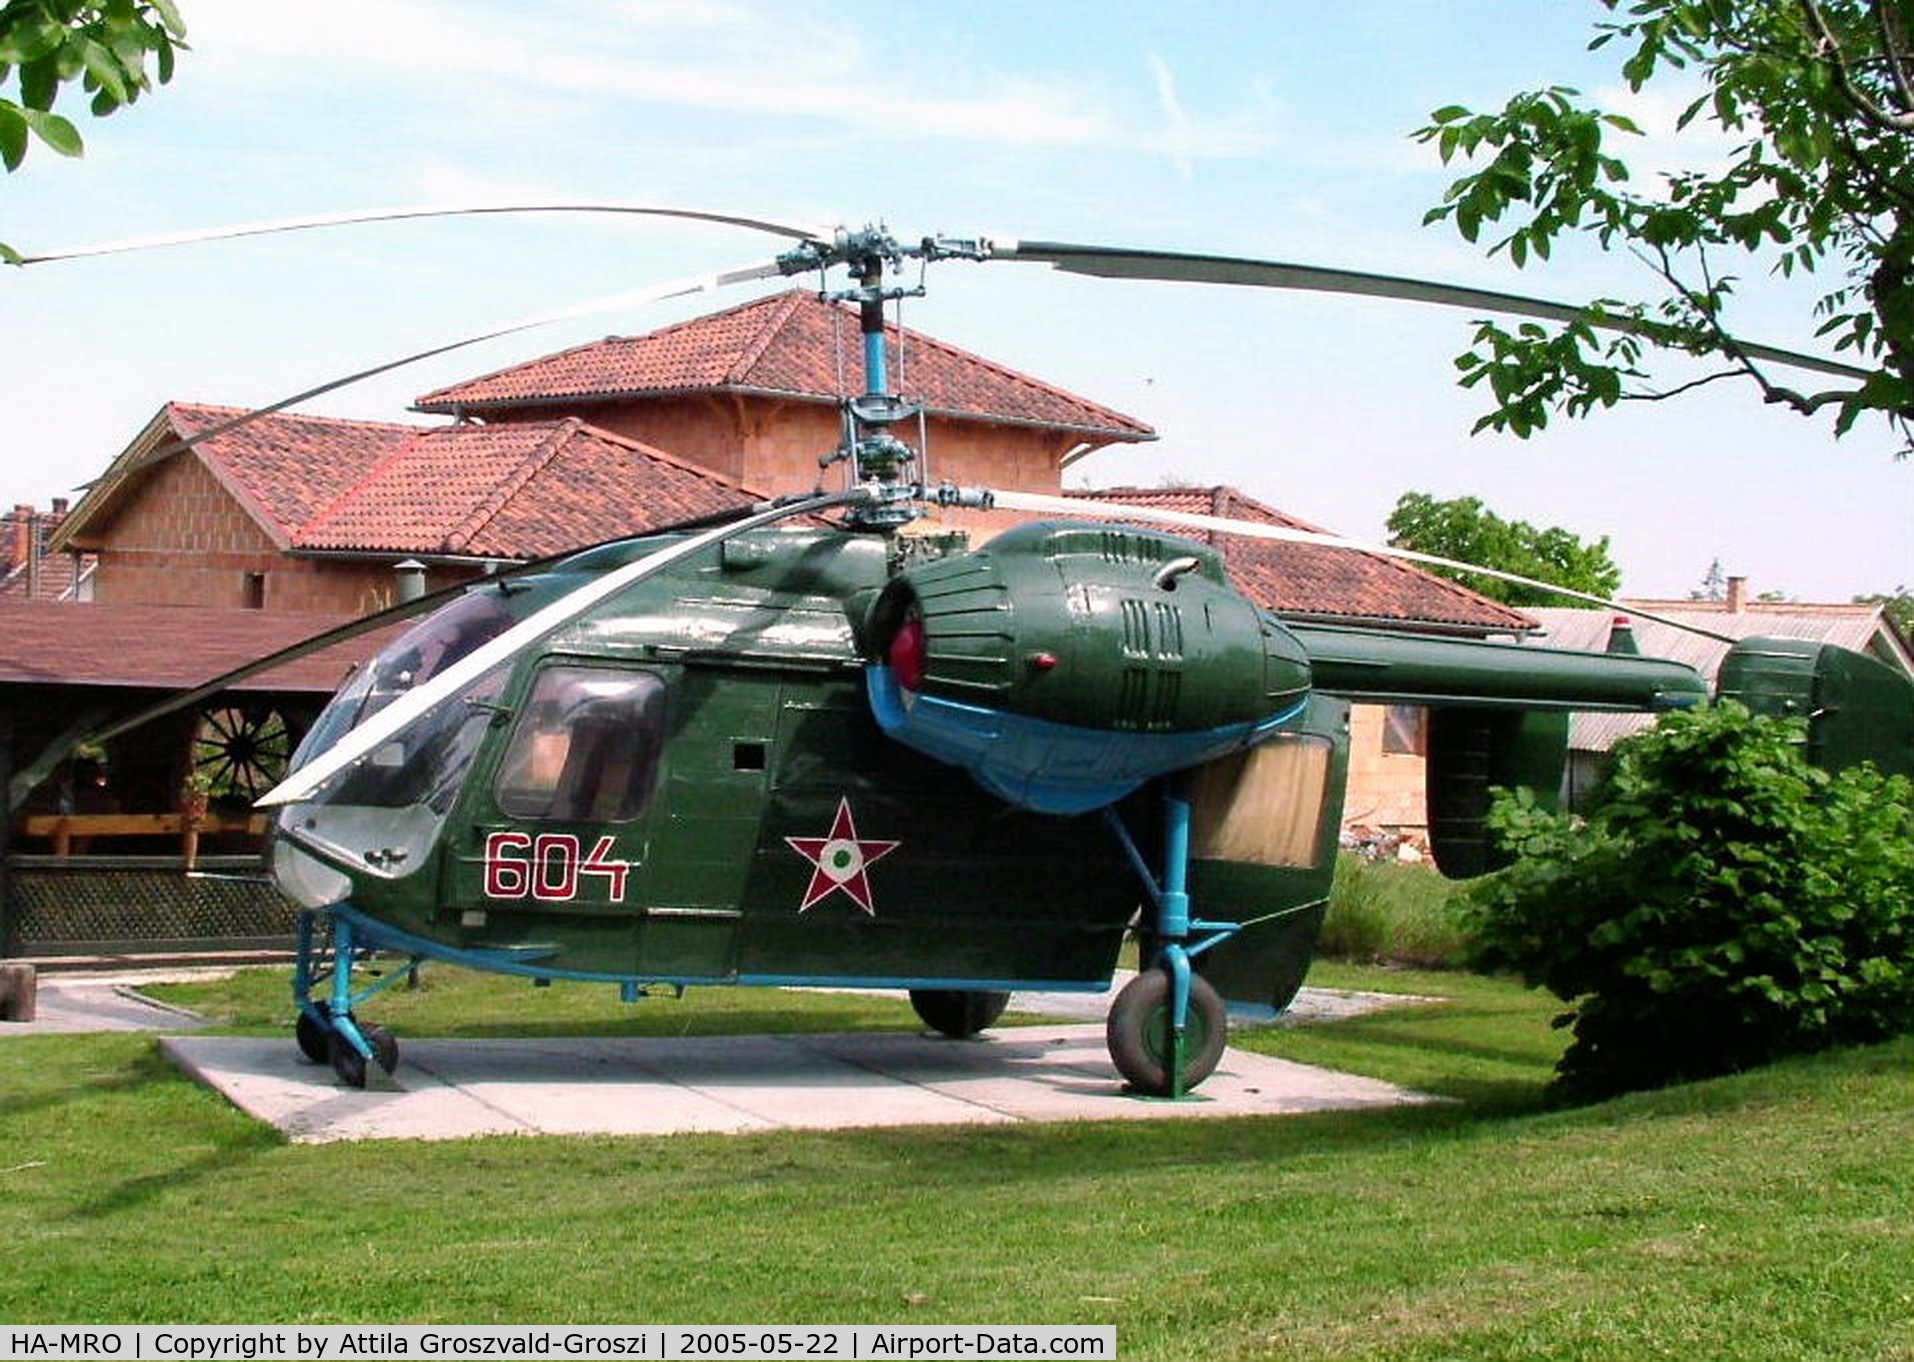 HA-MRO, 1970 Kamov Ka-26 Hoodlum C/N 7001604, After scrapping, restoring a former military painting and exhibited in the garden of a private house. Seregélyes, Hungary